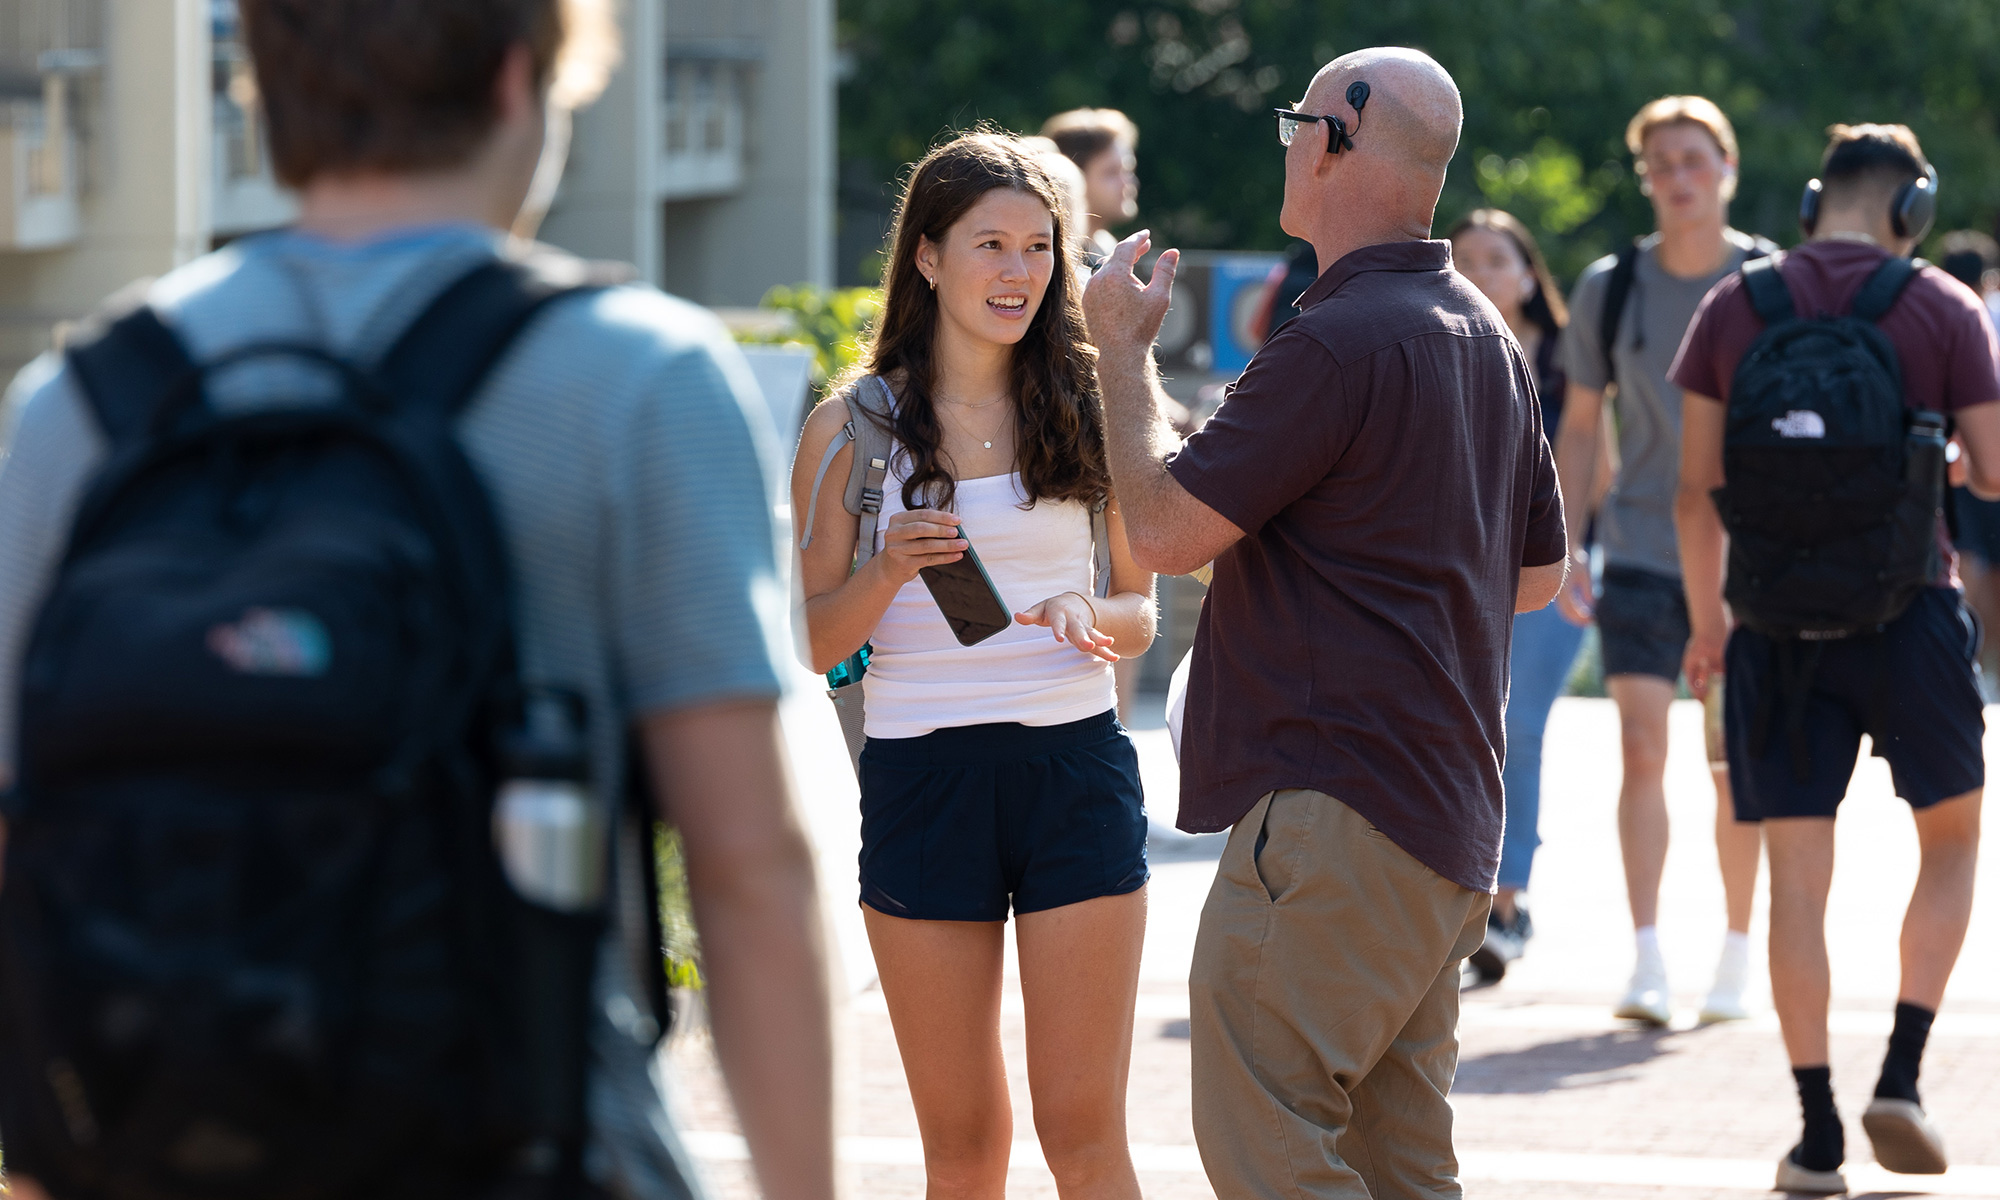 https://denison.eduStudent and faculty member talking to each other on the academic quad